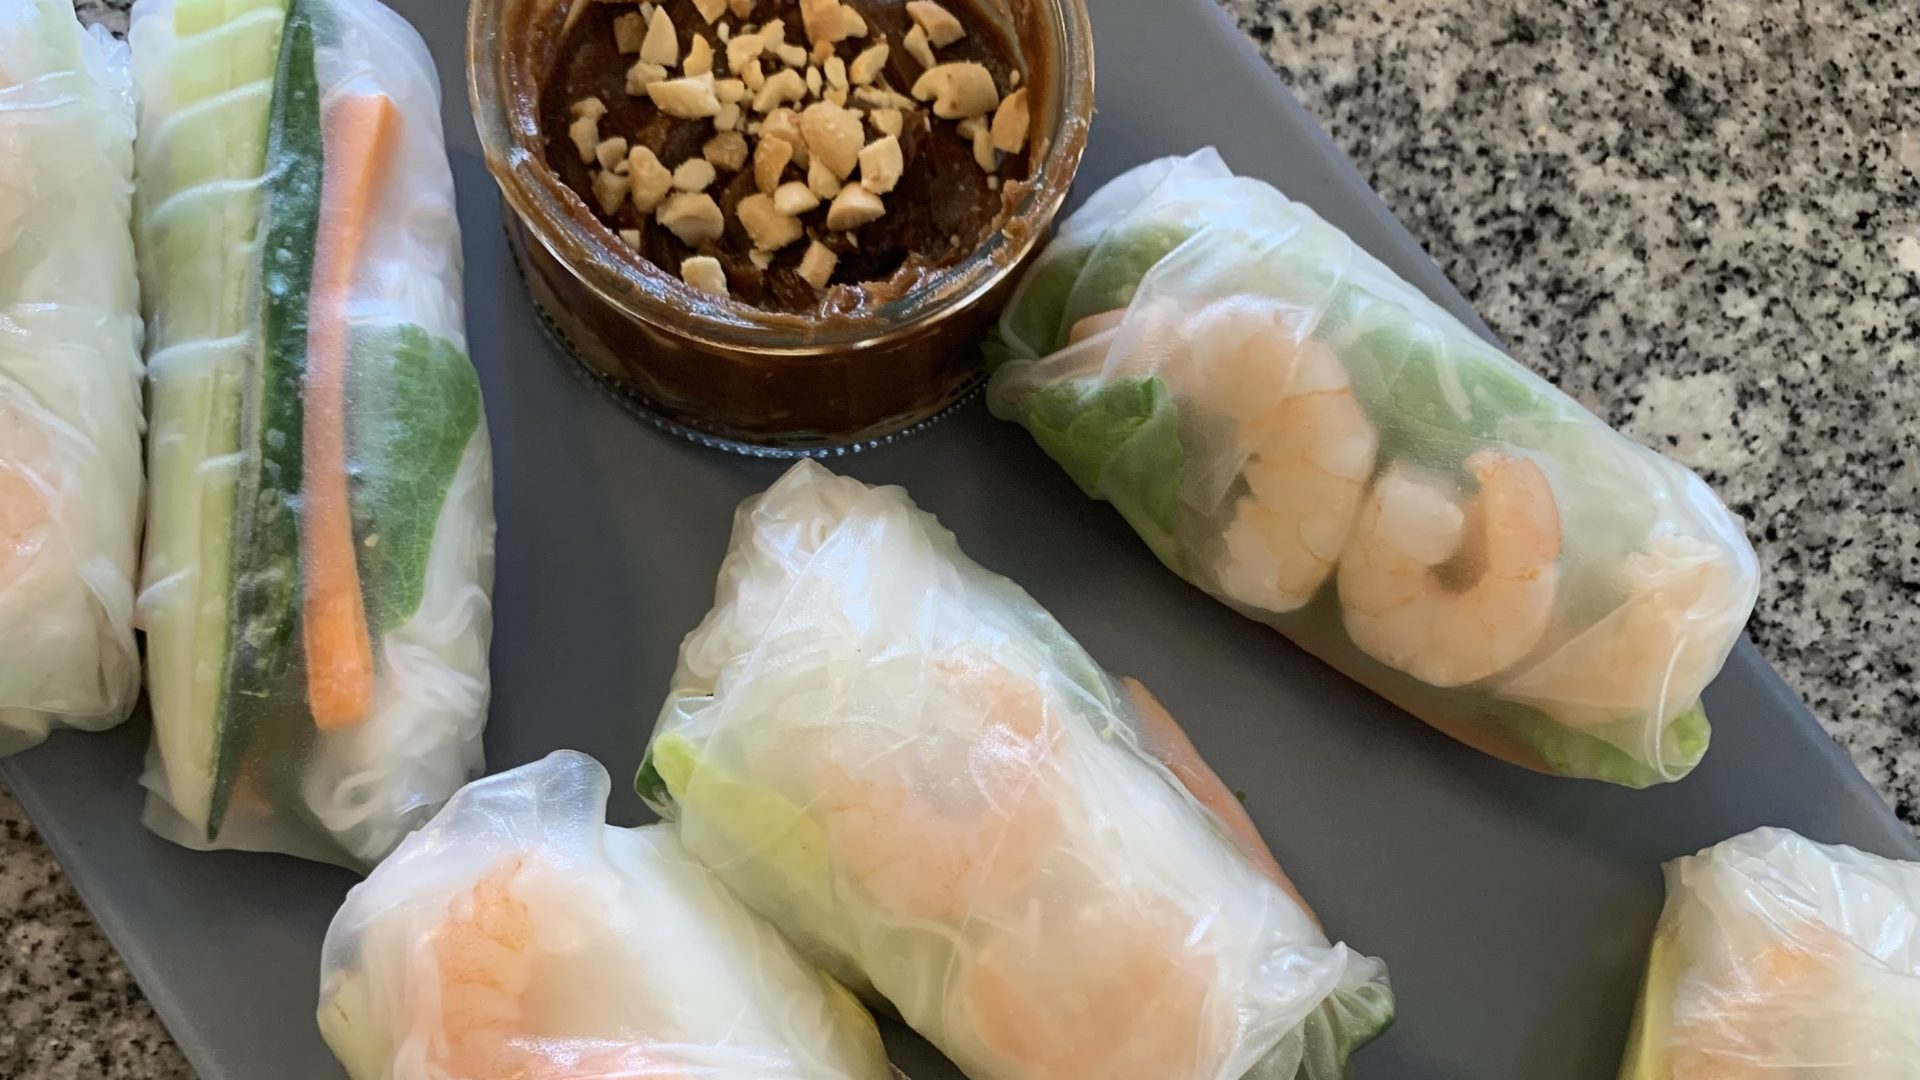 Vietnamese spring rolls with a side of peanut sauce